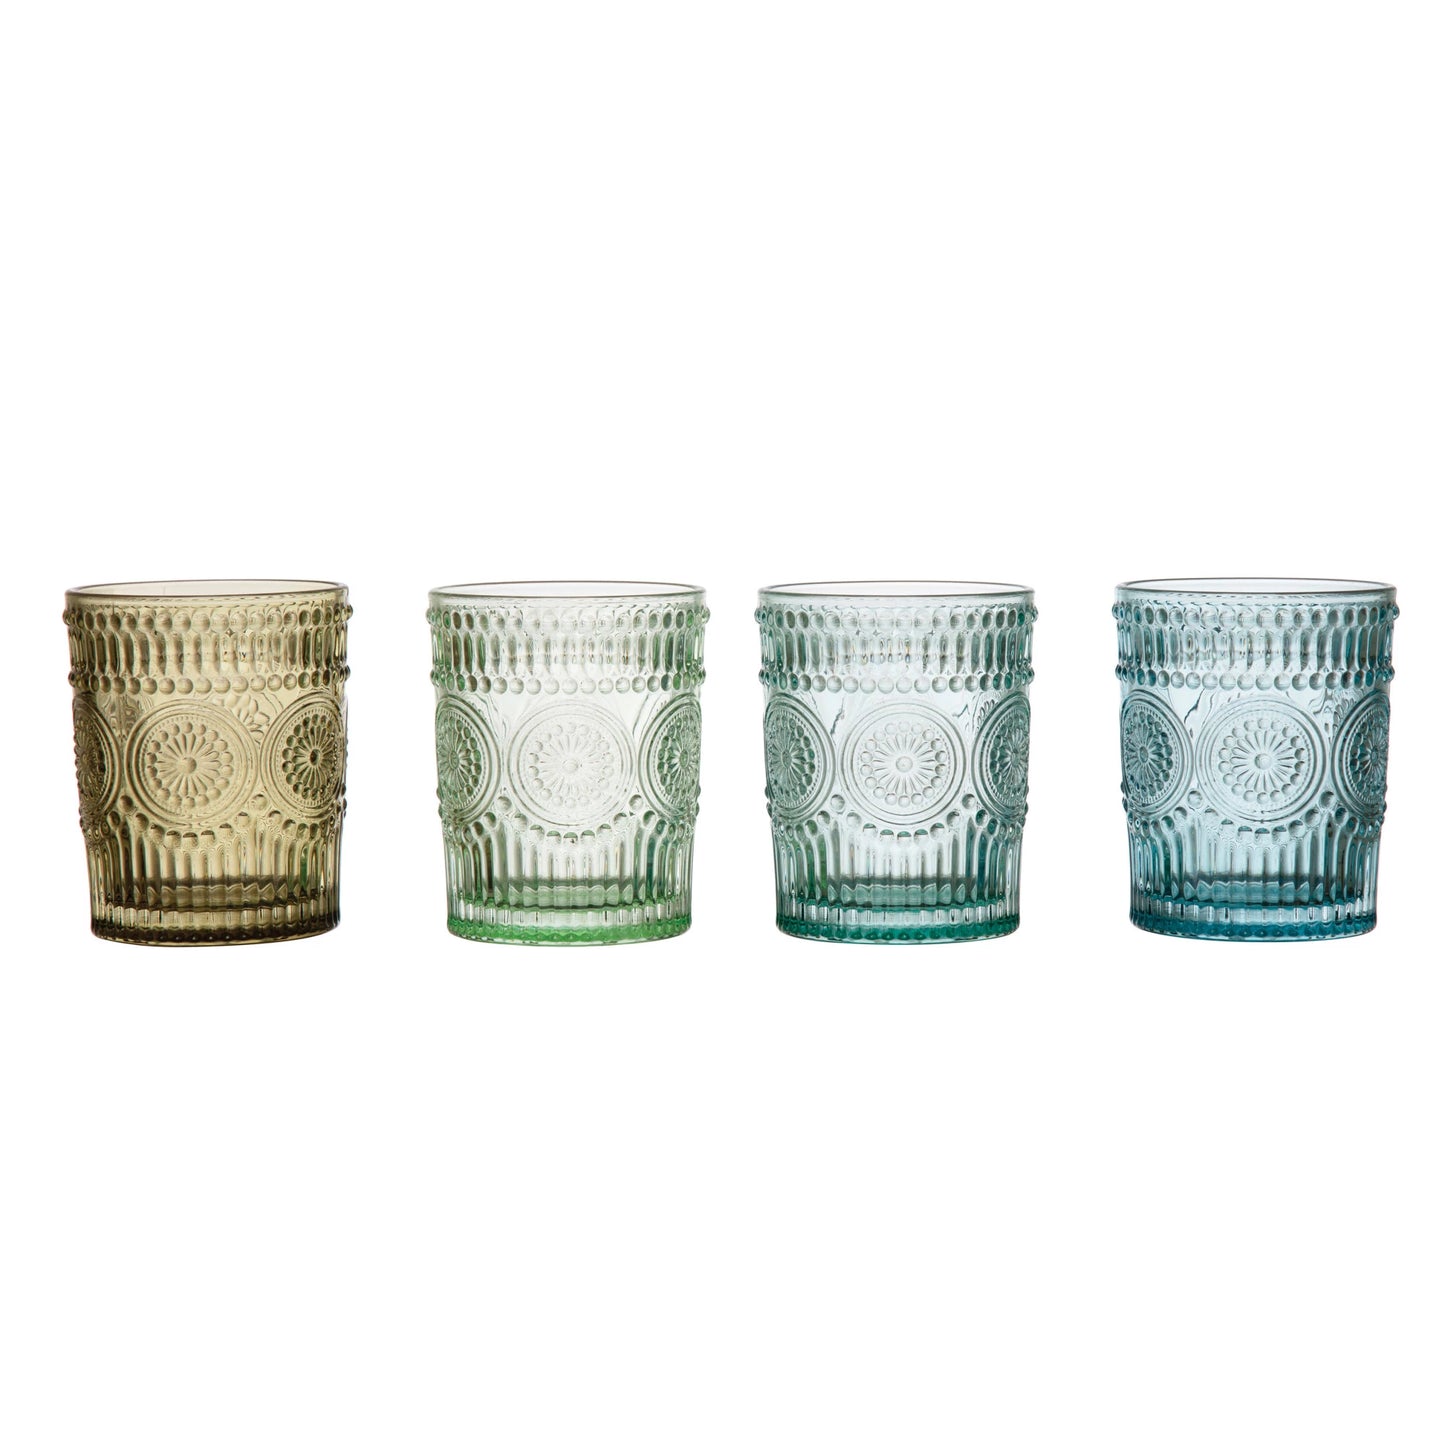 4 drinking glasses in assorted colors in a row on a white background.